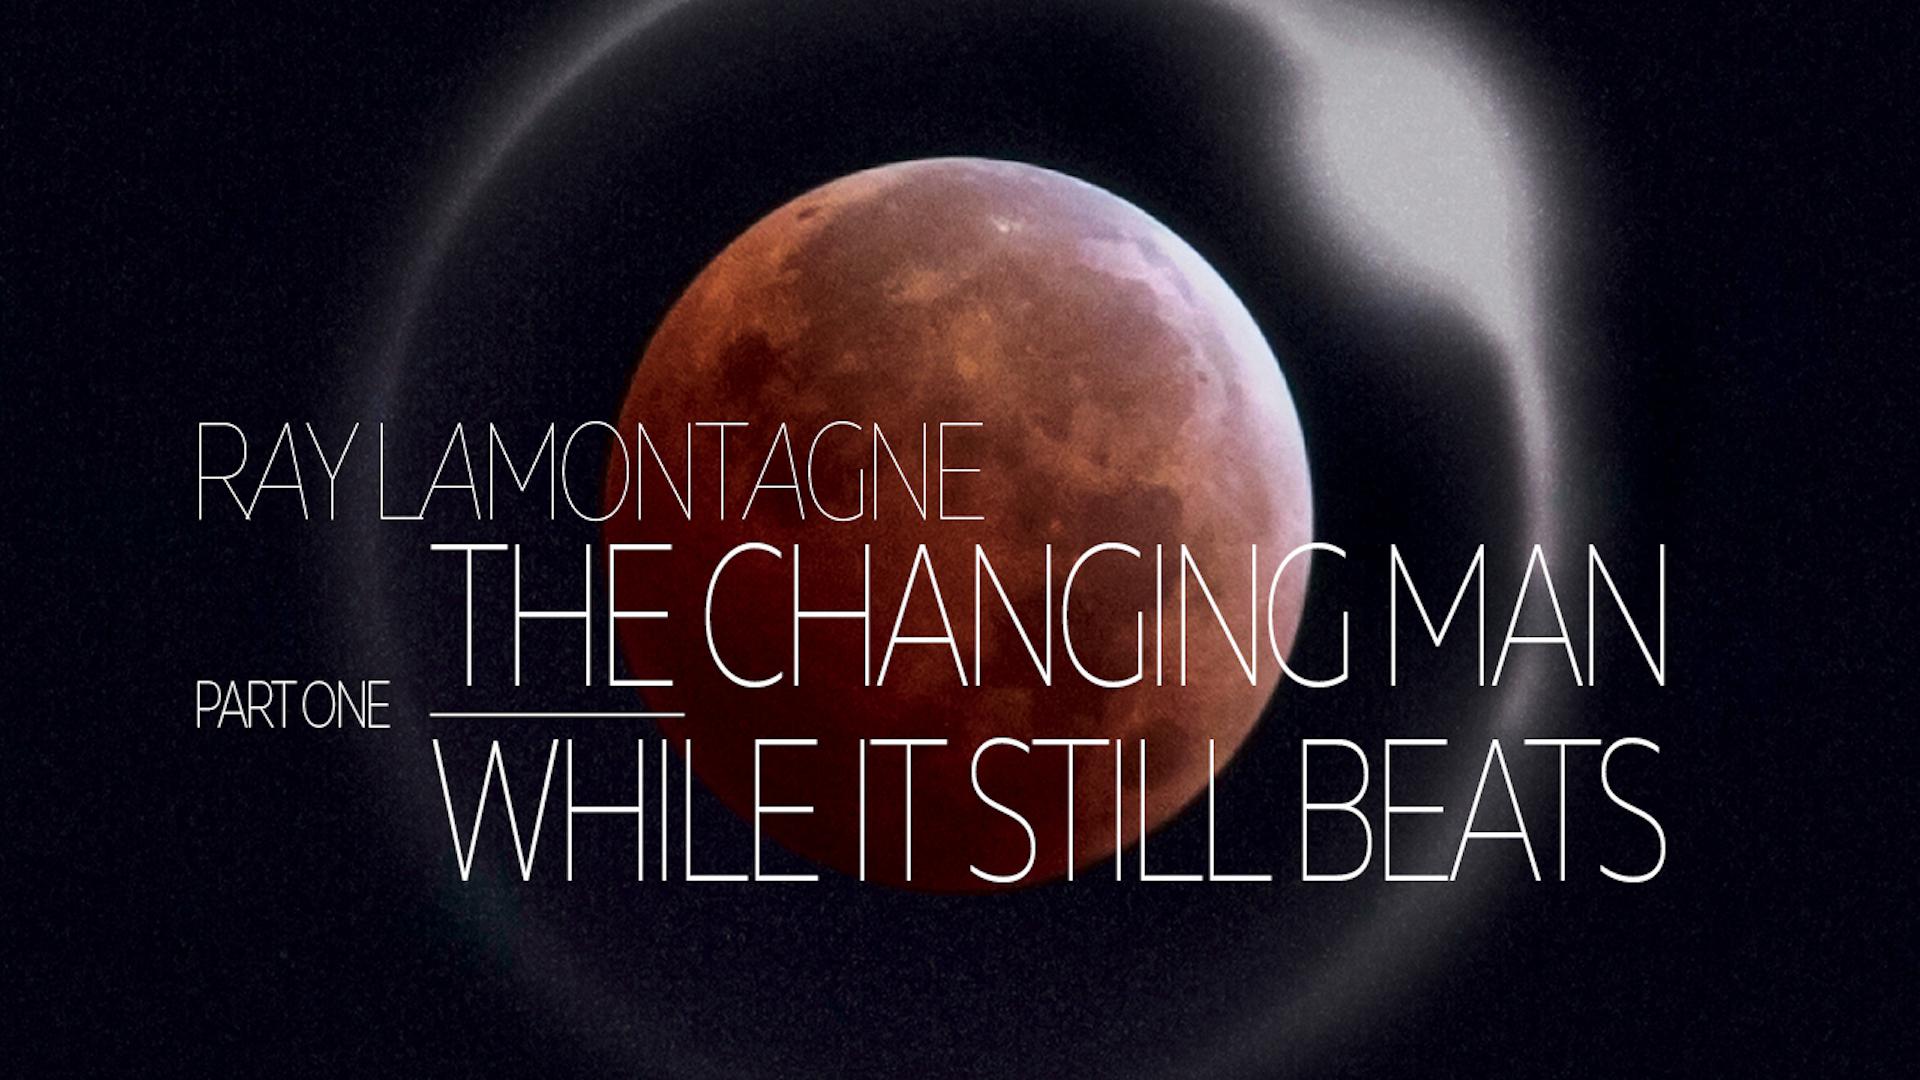 Ray LaMontagne - The Changing Man/While It Still Beats (Ouroboros Part 1) (Audio)